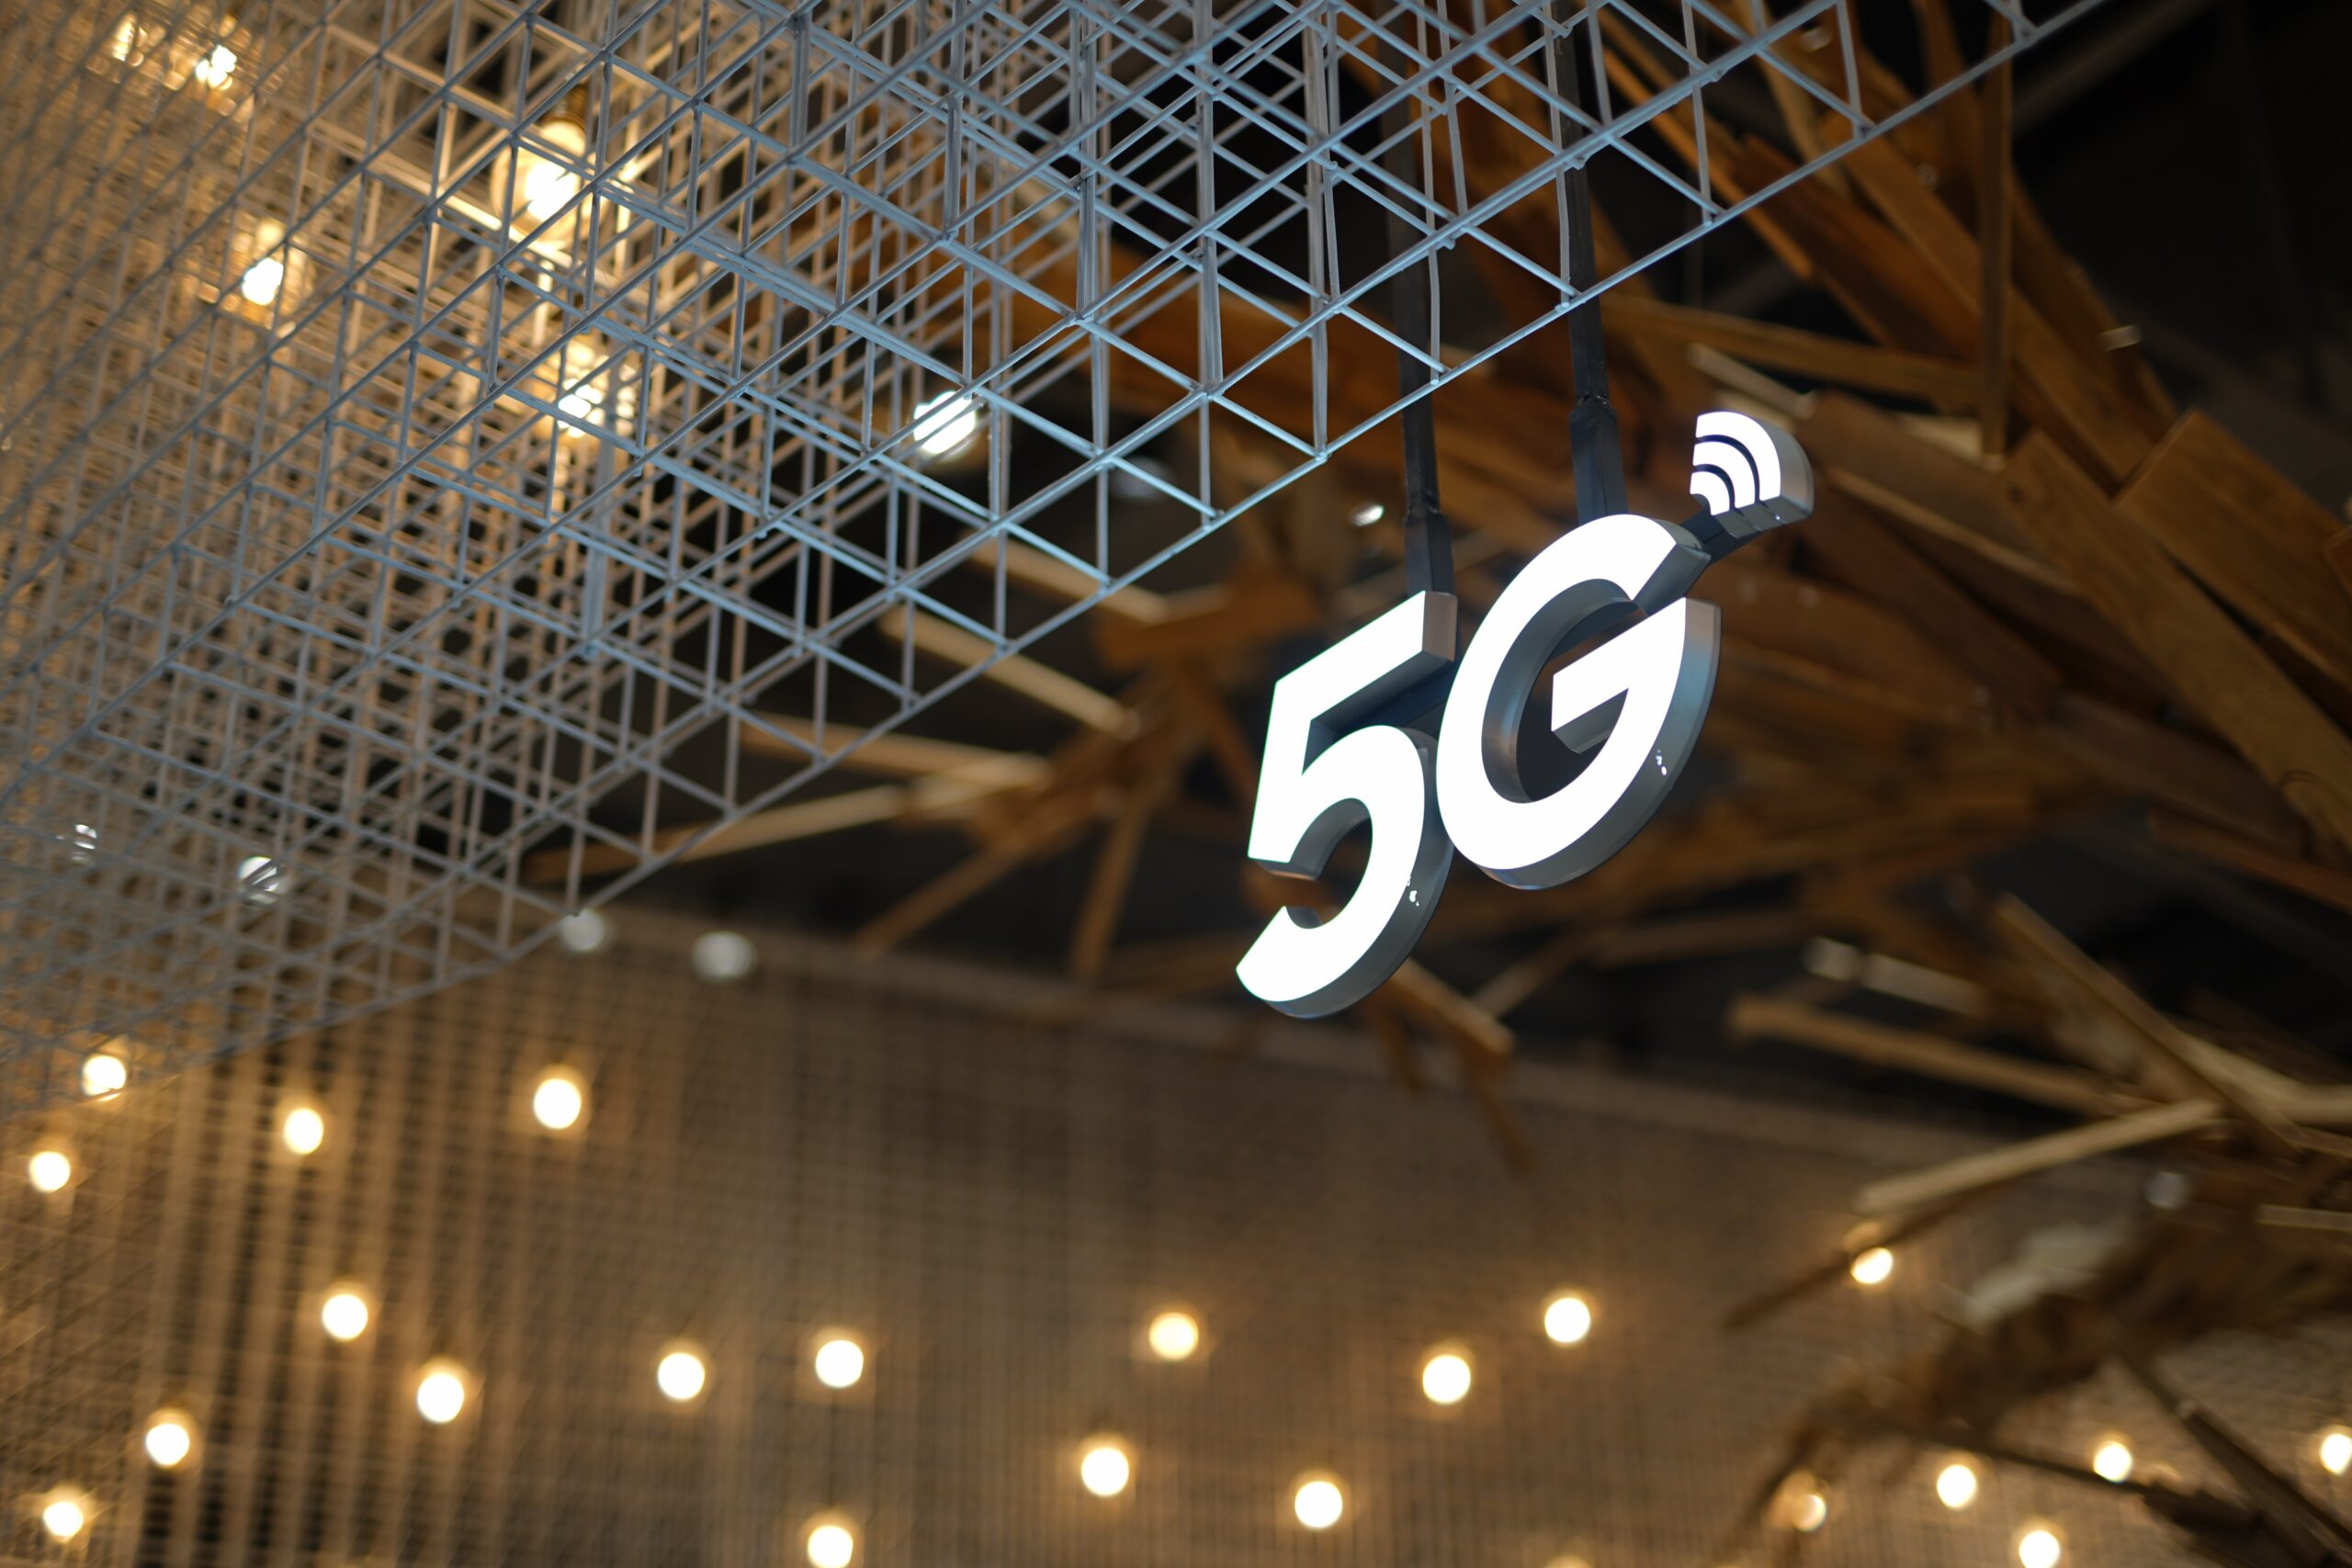 How To Make A 5G Network Work For You